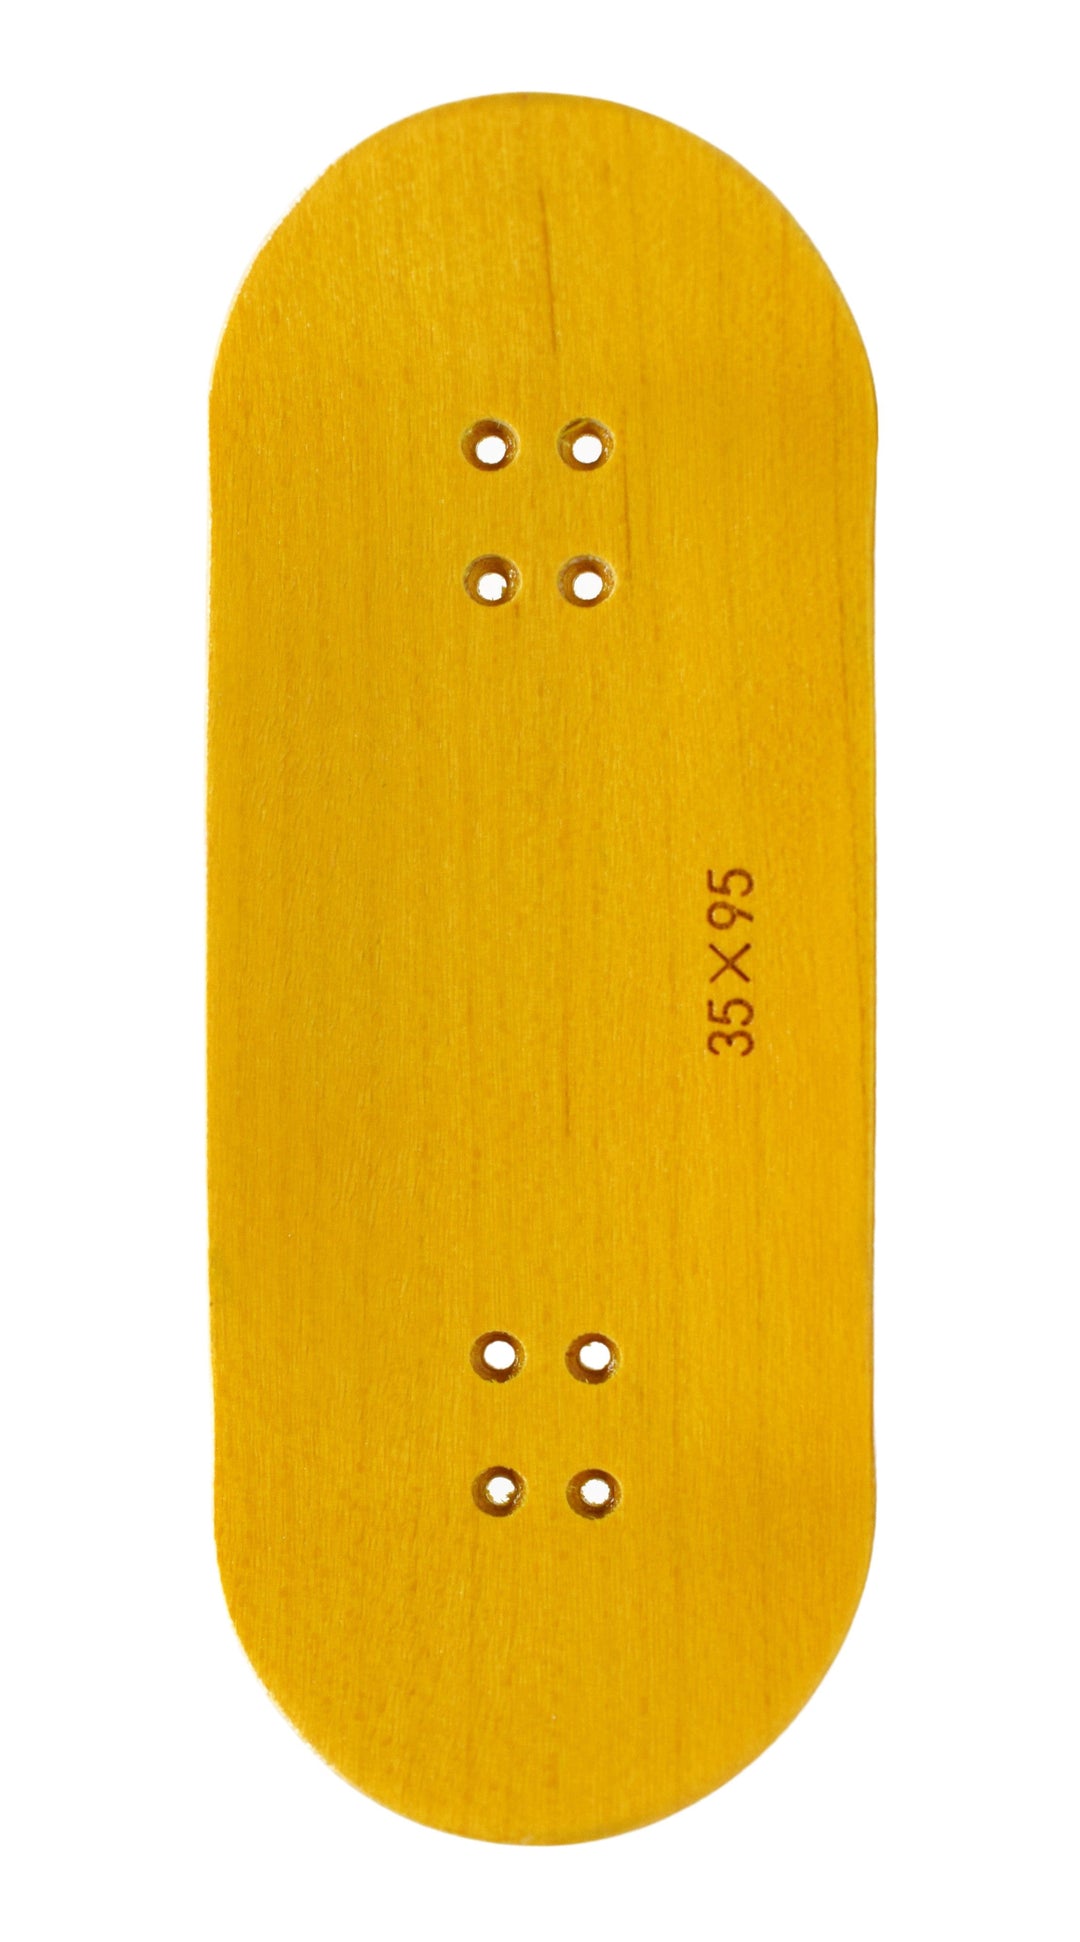 Teak Tuning PROlific Wooden 5 Ply Fingerboard Deck 35x95mm - Banana Yellow - with Color Matching Mid Ply